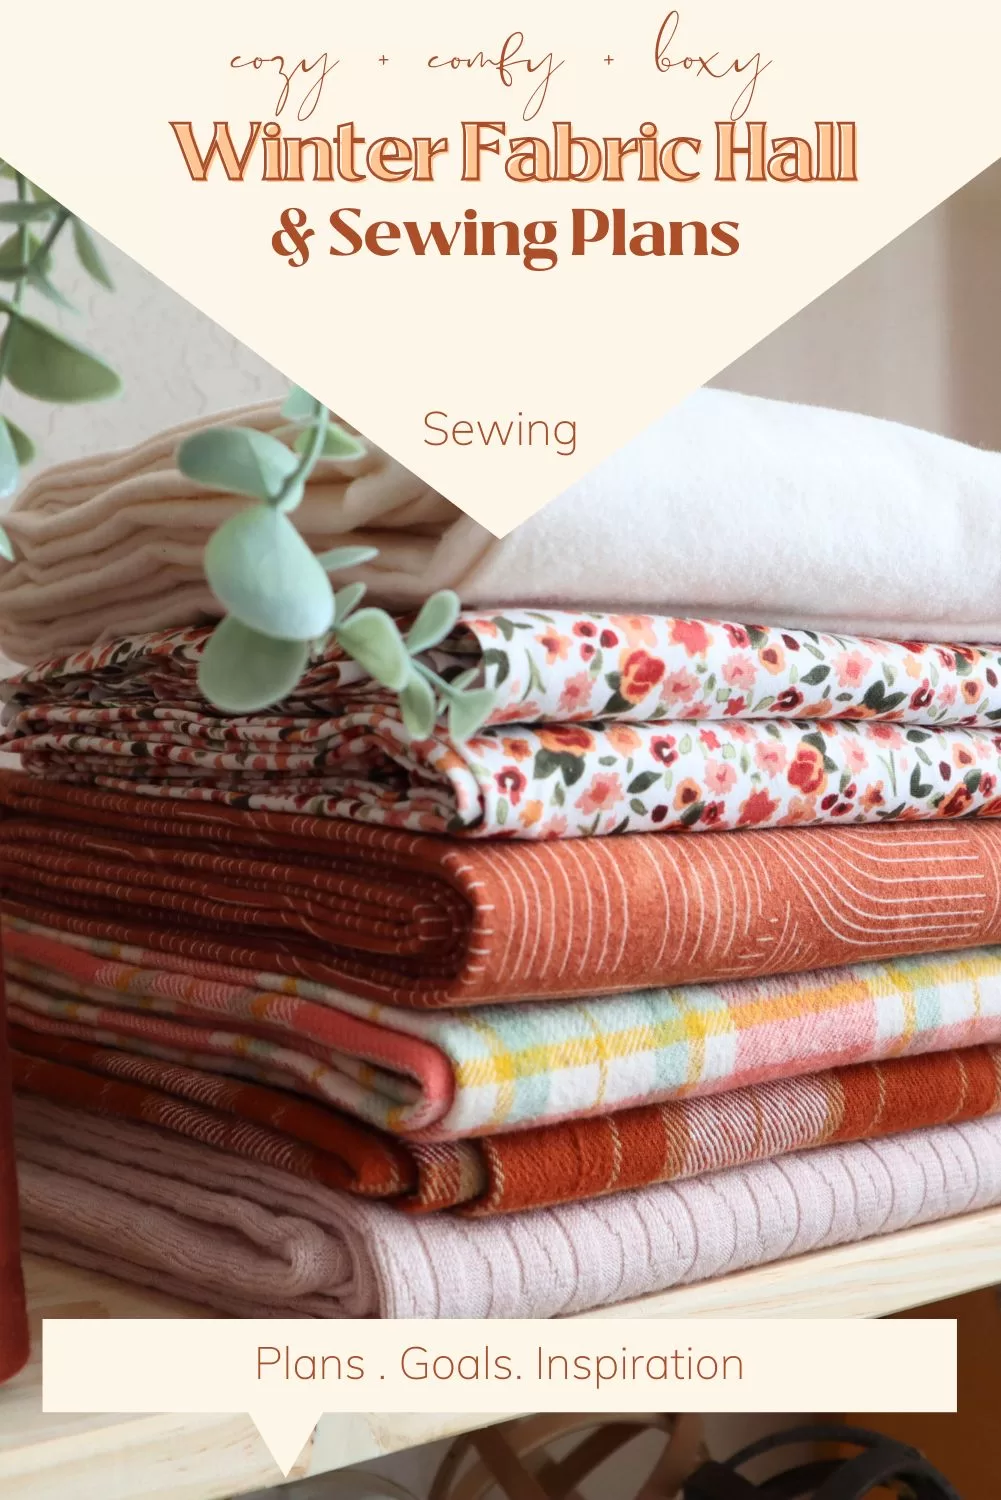 Winter Fabric Haul and Sewing Plans